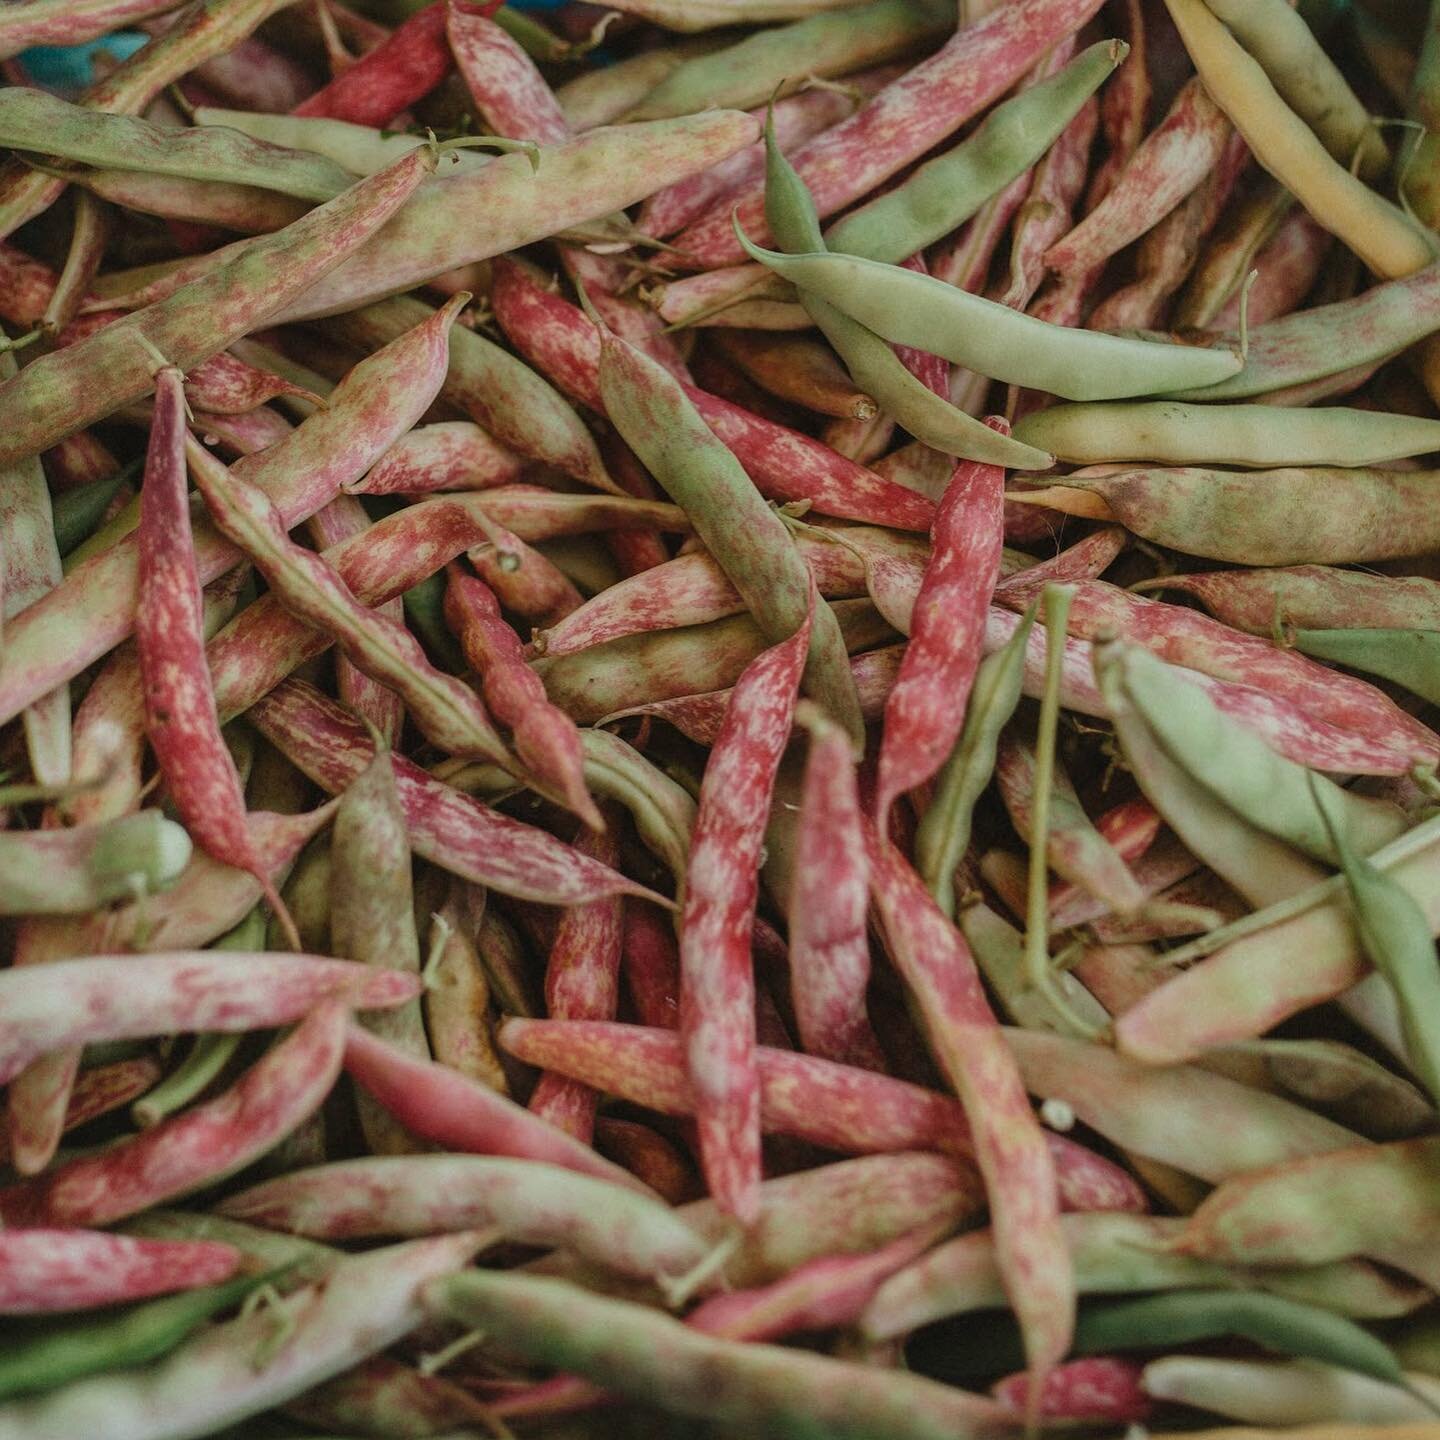 MANY PEOPLE HAVE ASKED ME WHAT KIND OF BEANS ARE THESE‼️ 😆

These beautiful Beans are Cranberry beans, also known as Roman beans or speckled sugar beans, are smooth, pinkish, oval-shaped beans with gorgeous dark-red speckles. They&rsquo;re medium si